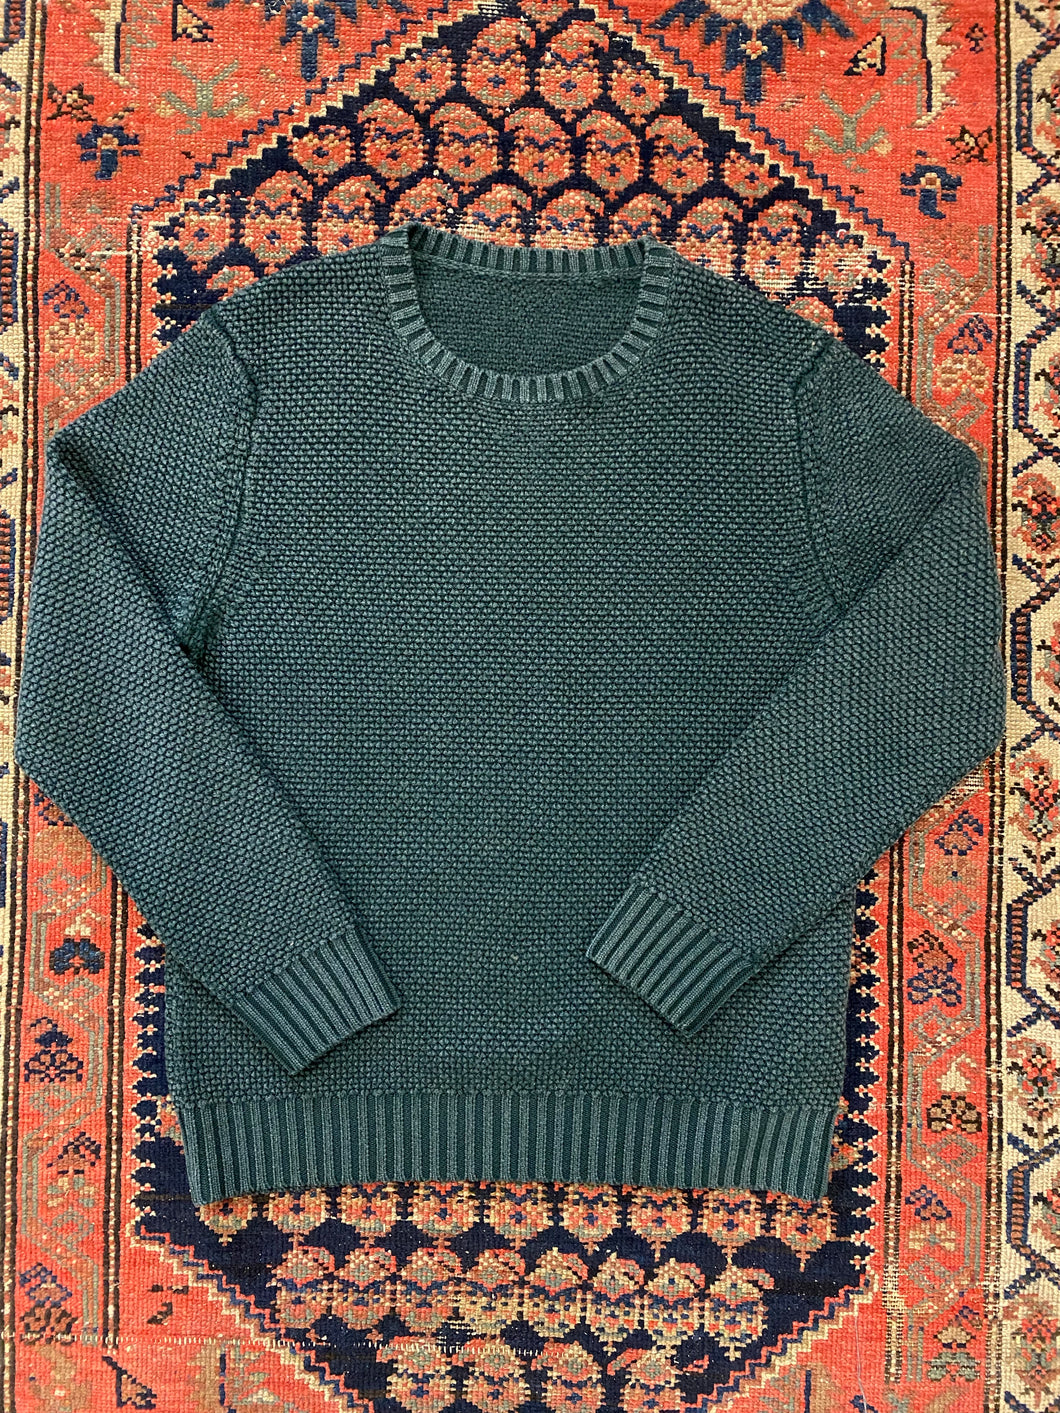 Vintage Teal Stone Wash Knit Sweater - M